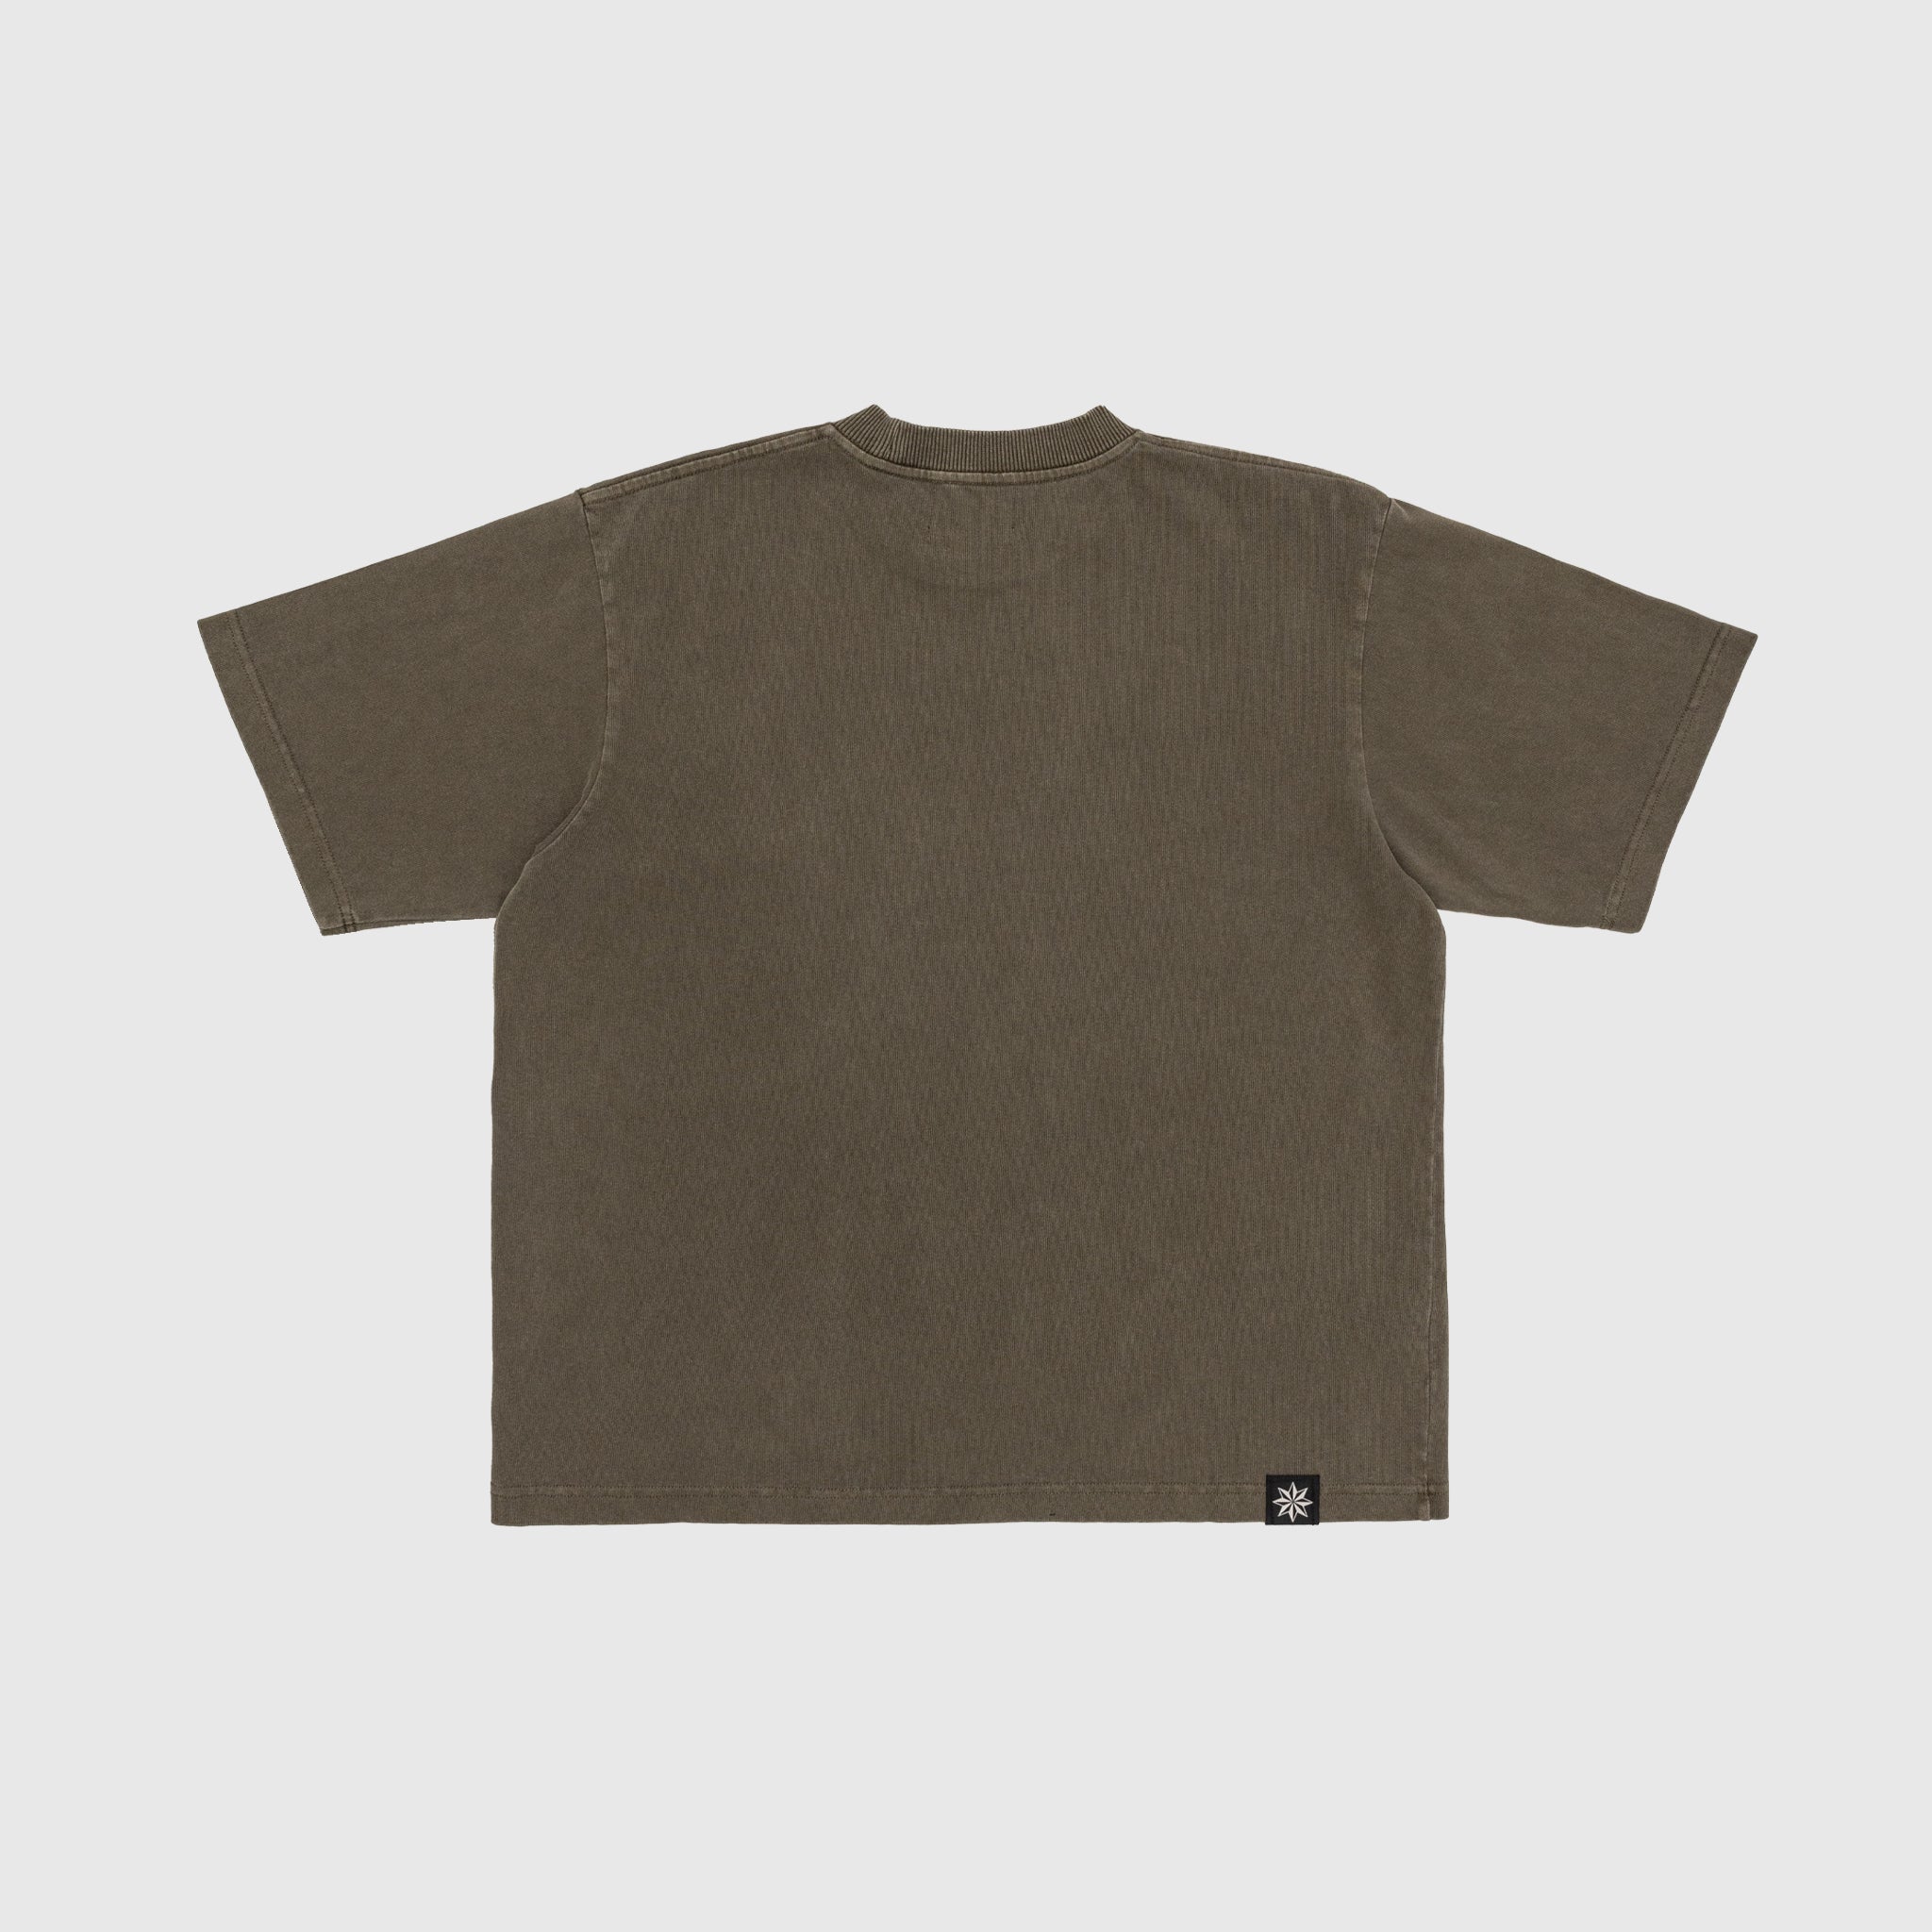 TO THE BEACH BOXY S/S T-SHIRT